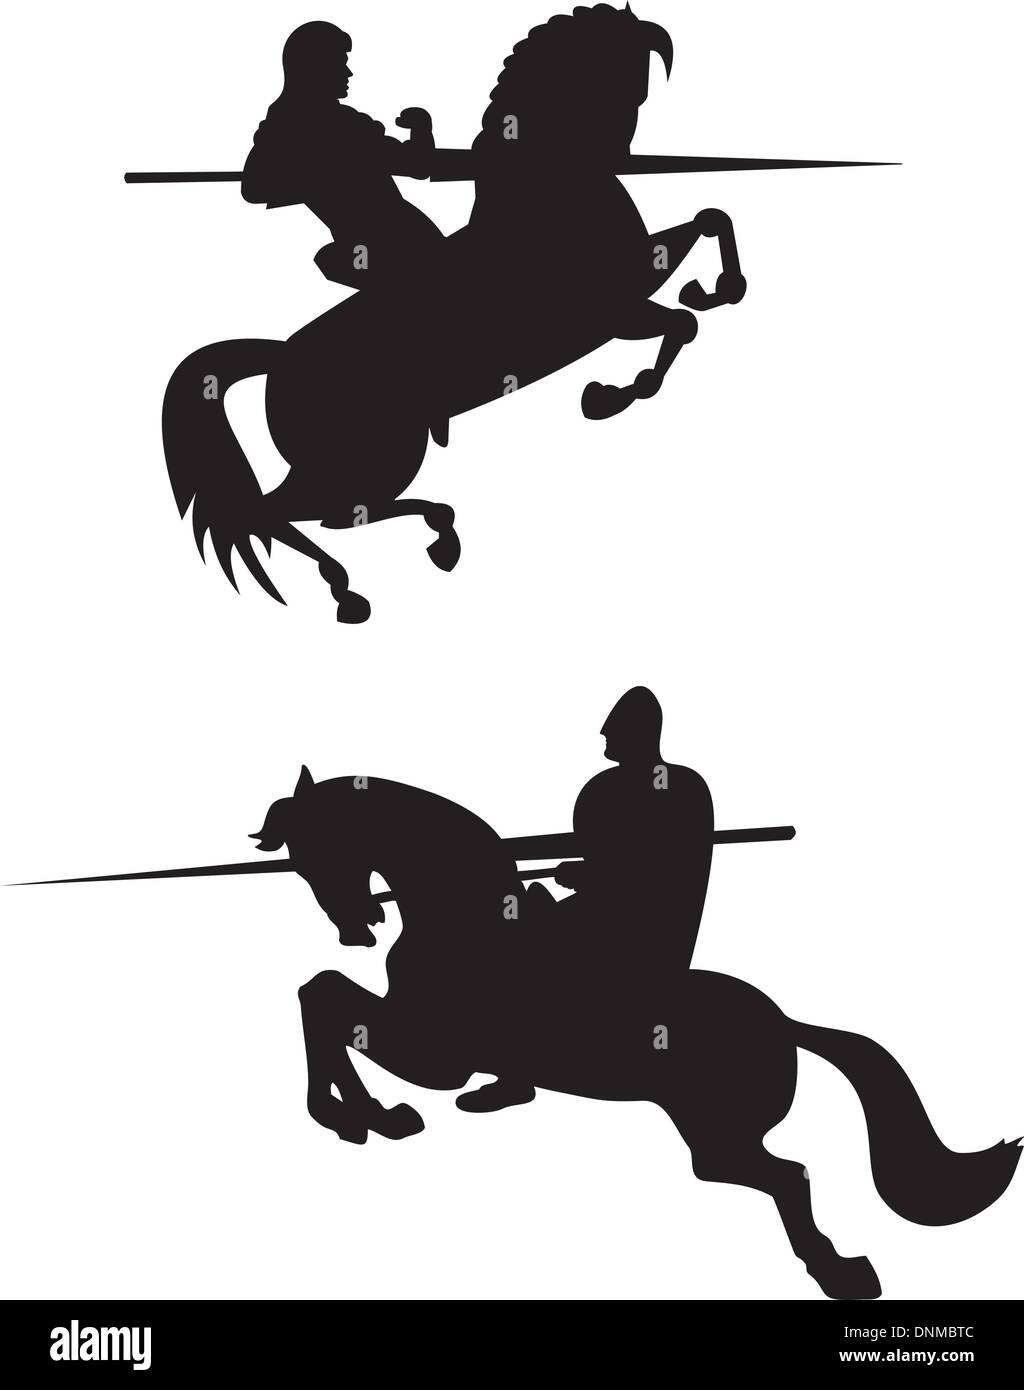 Illustration of knight in full armor riding horse steed silhouette done in retro style. Stock Vector